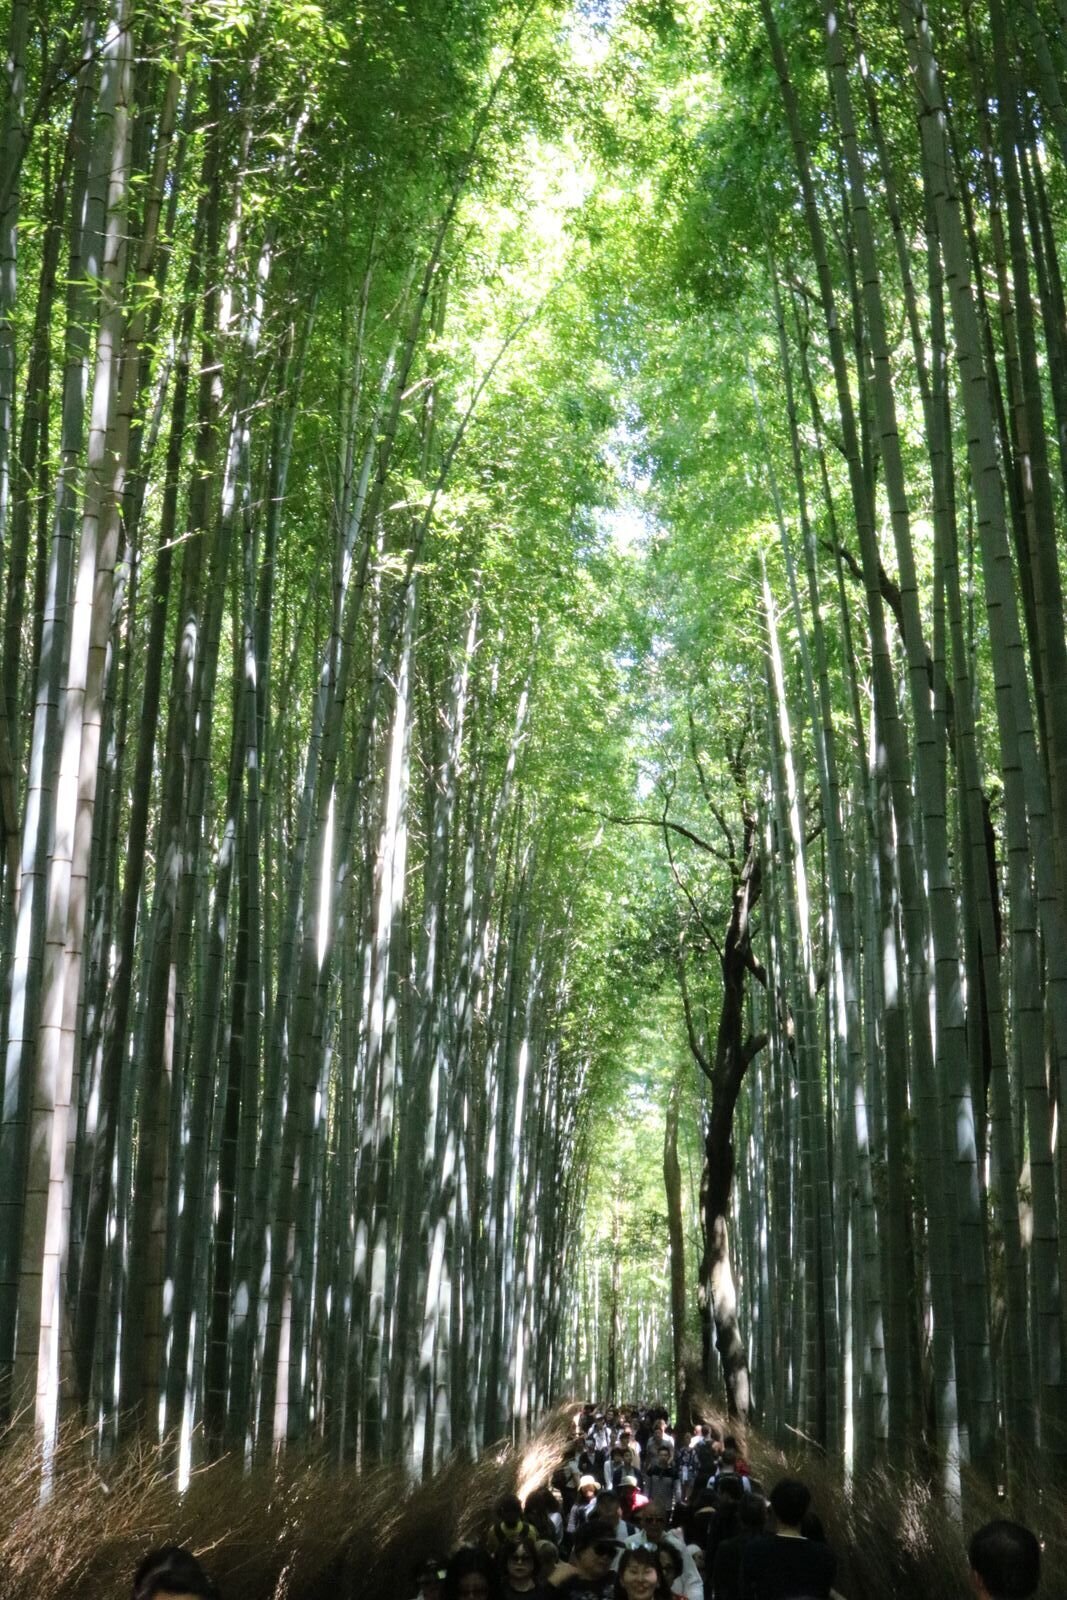 The rows of tall bamboo lining the path of the bamboo forest